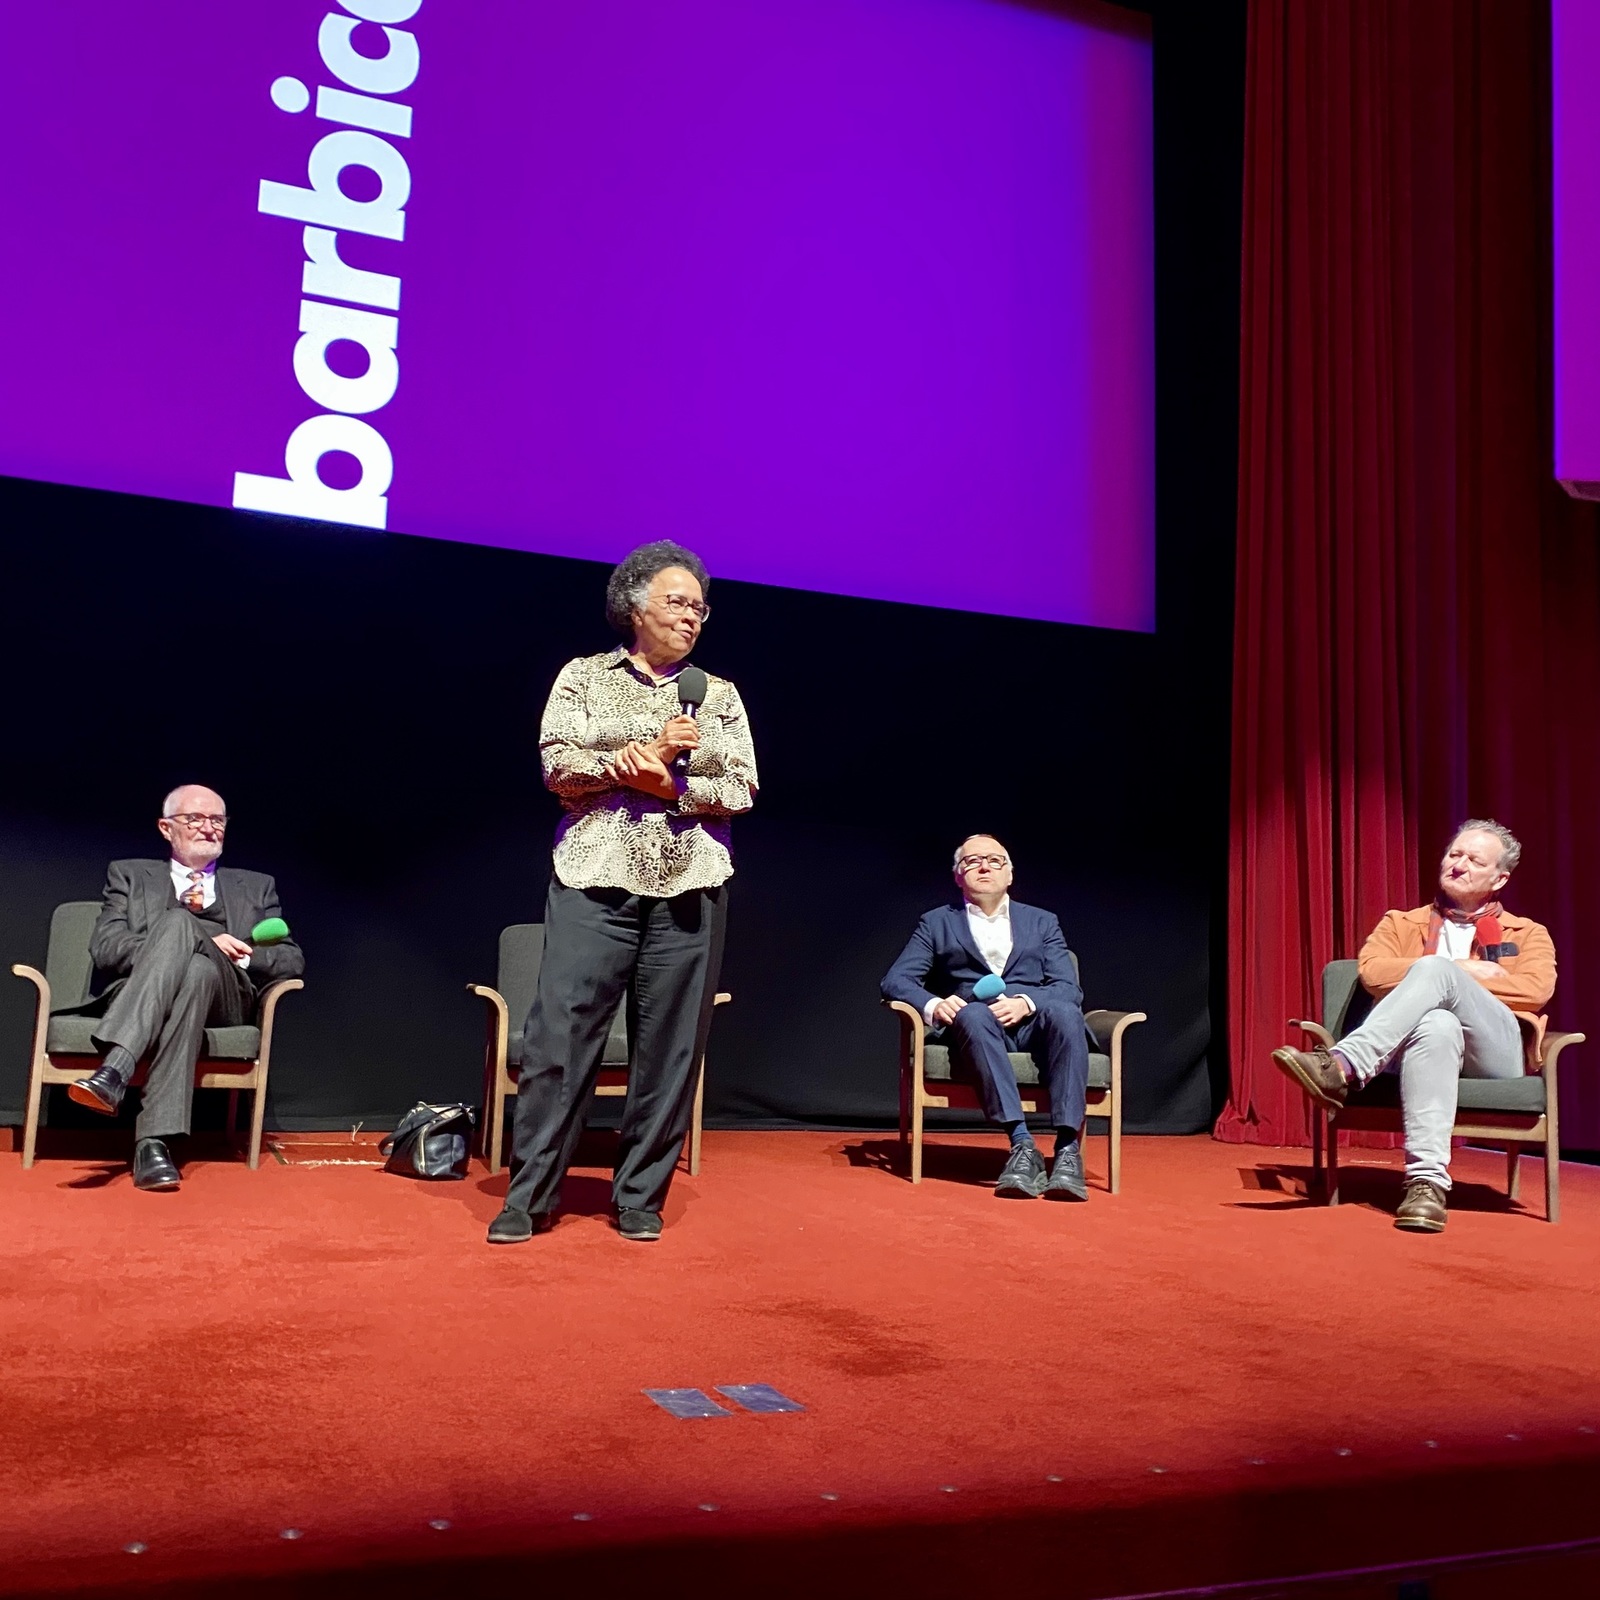 28 Feb 23 -The charity showing at The Barbican of ‘The Duke’ in aid of The Sherriff’s and Recorder’s Fund featured a Q&A session with Mr Jim Broadbent, Mr Clive Coleman and Richard Bean was a huge success, raising £15k . A huge ‘THANK YOU!’ to all concerned